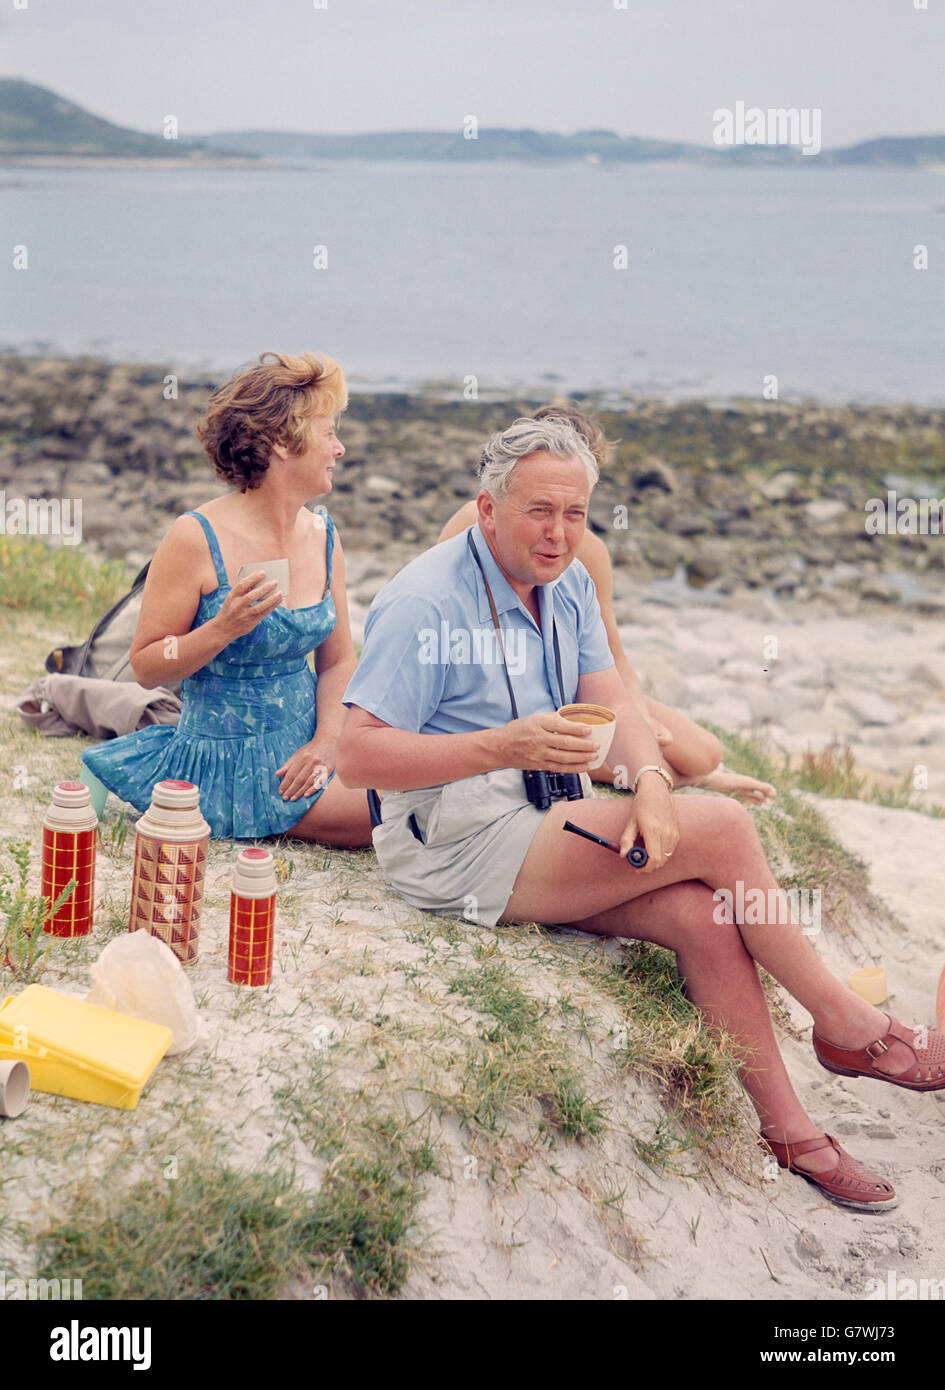 Prime Minister Harold Wilson, wearing a shirt and shorts, pictured with his wife Mary during their summer holiday in the Isles of Scilly. Stock Photo